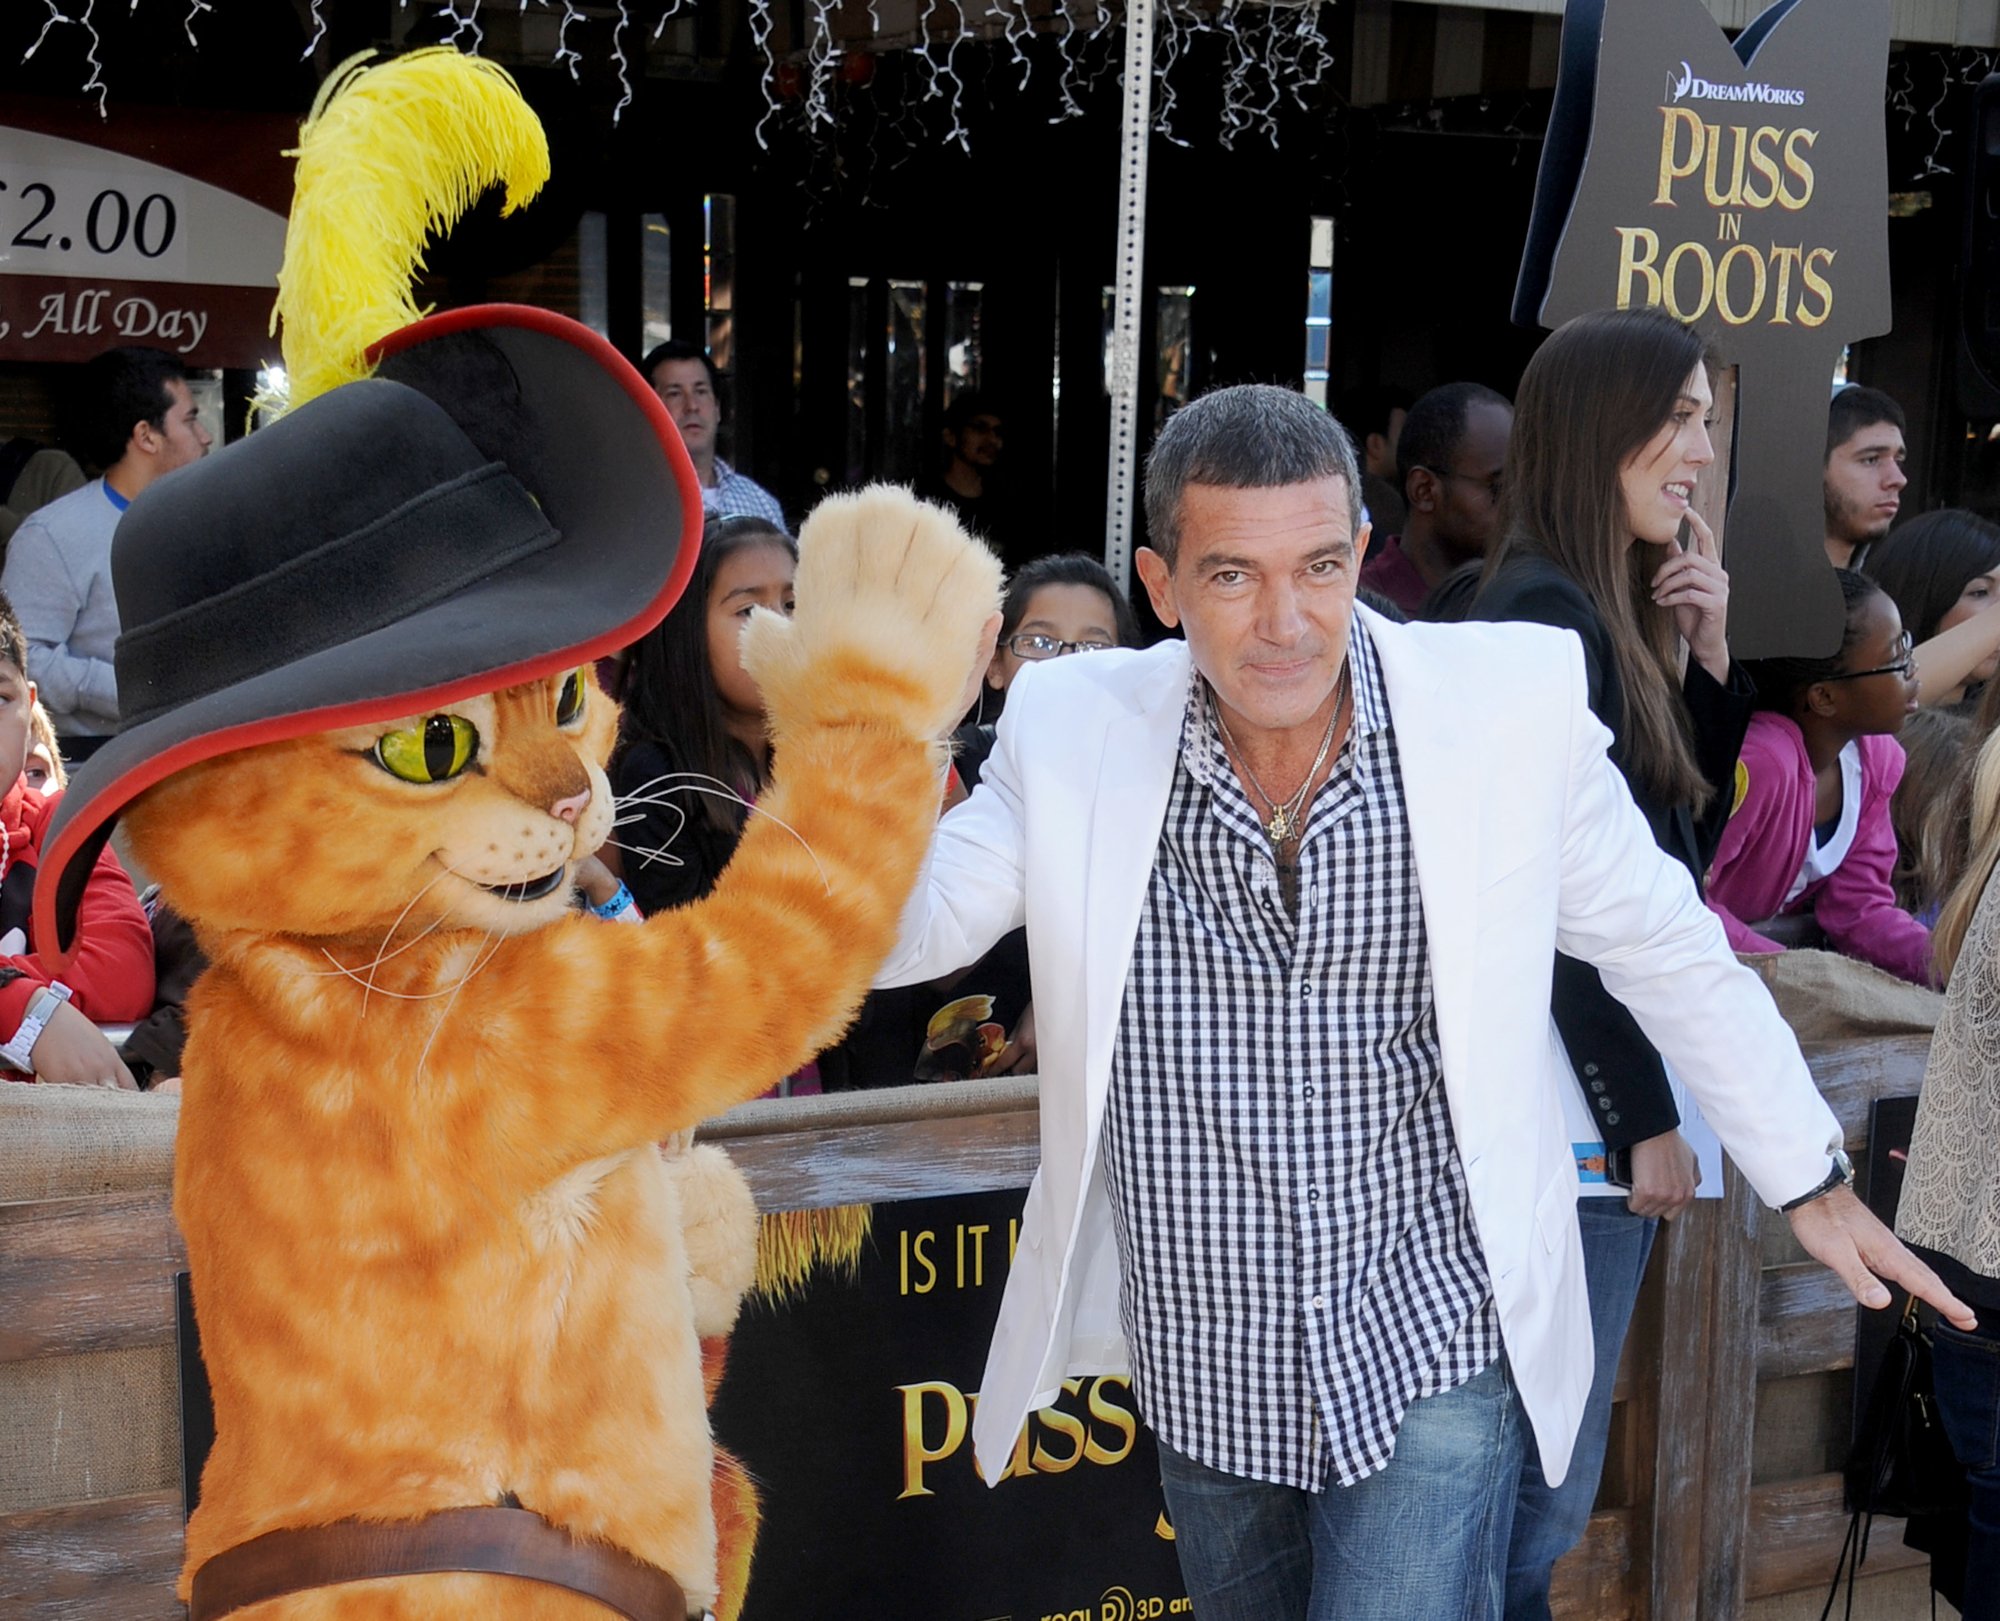 'Shrek 2' star Antonio Banderas and Puss in Boots high-fiving in front of a crowd of fans